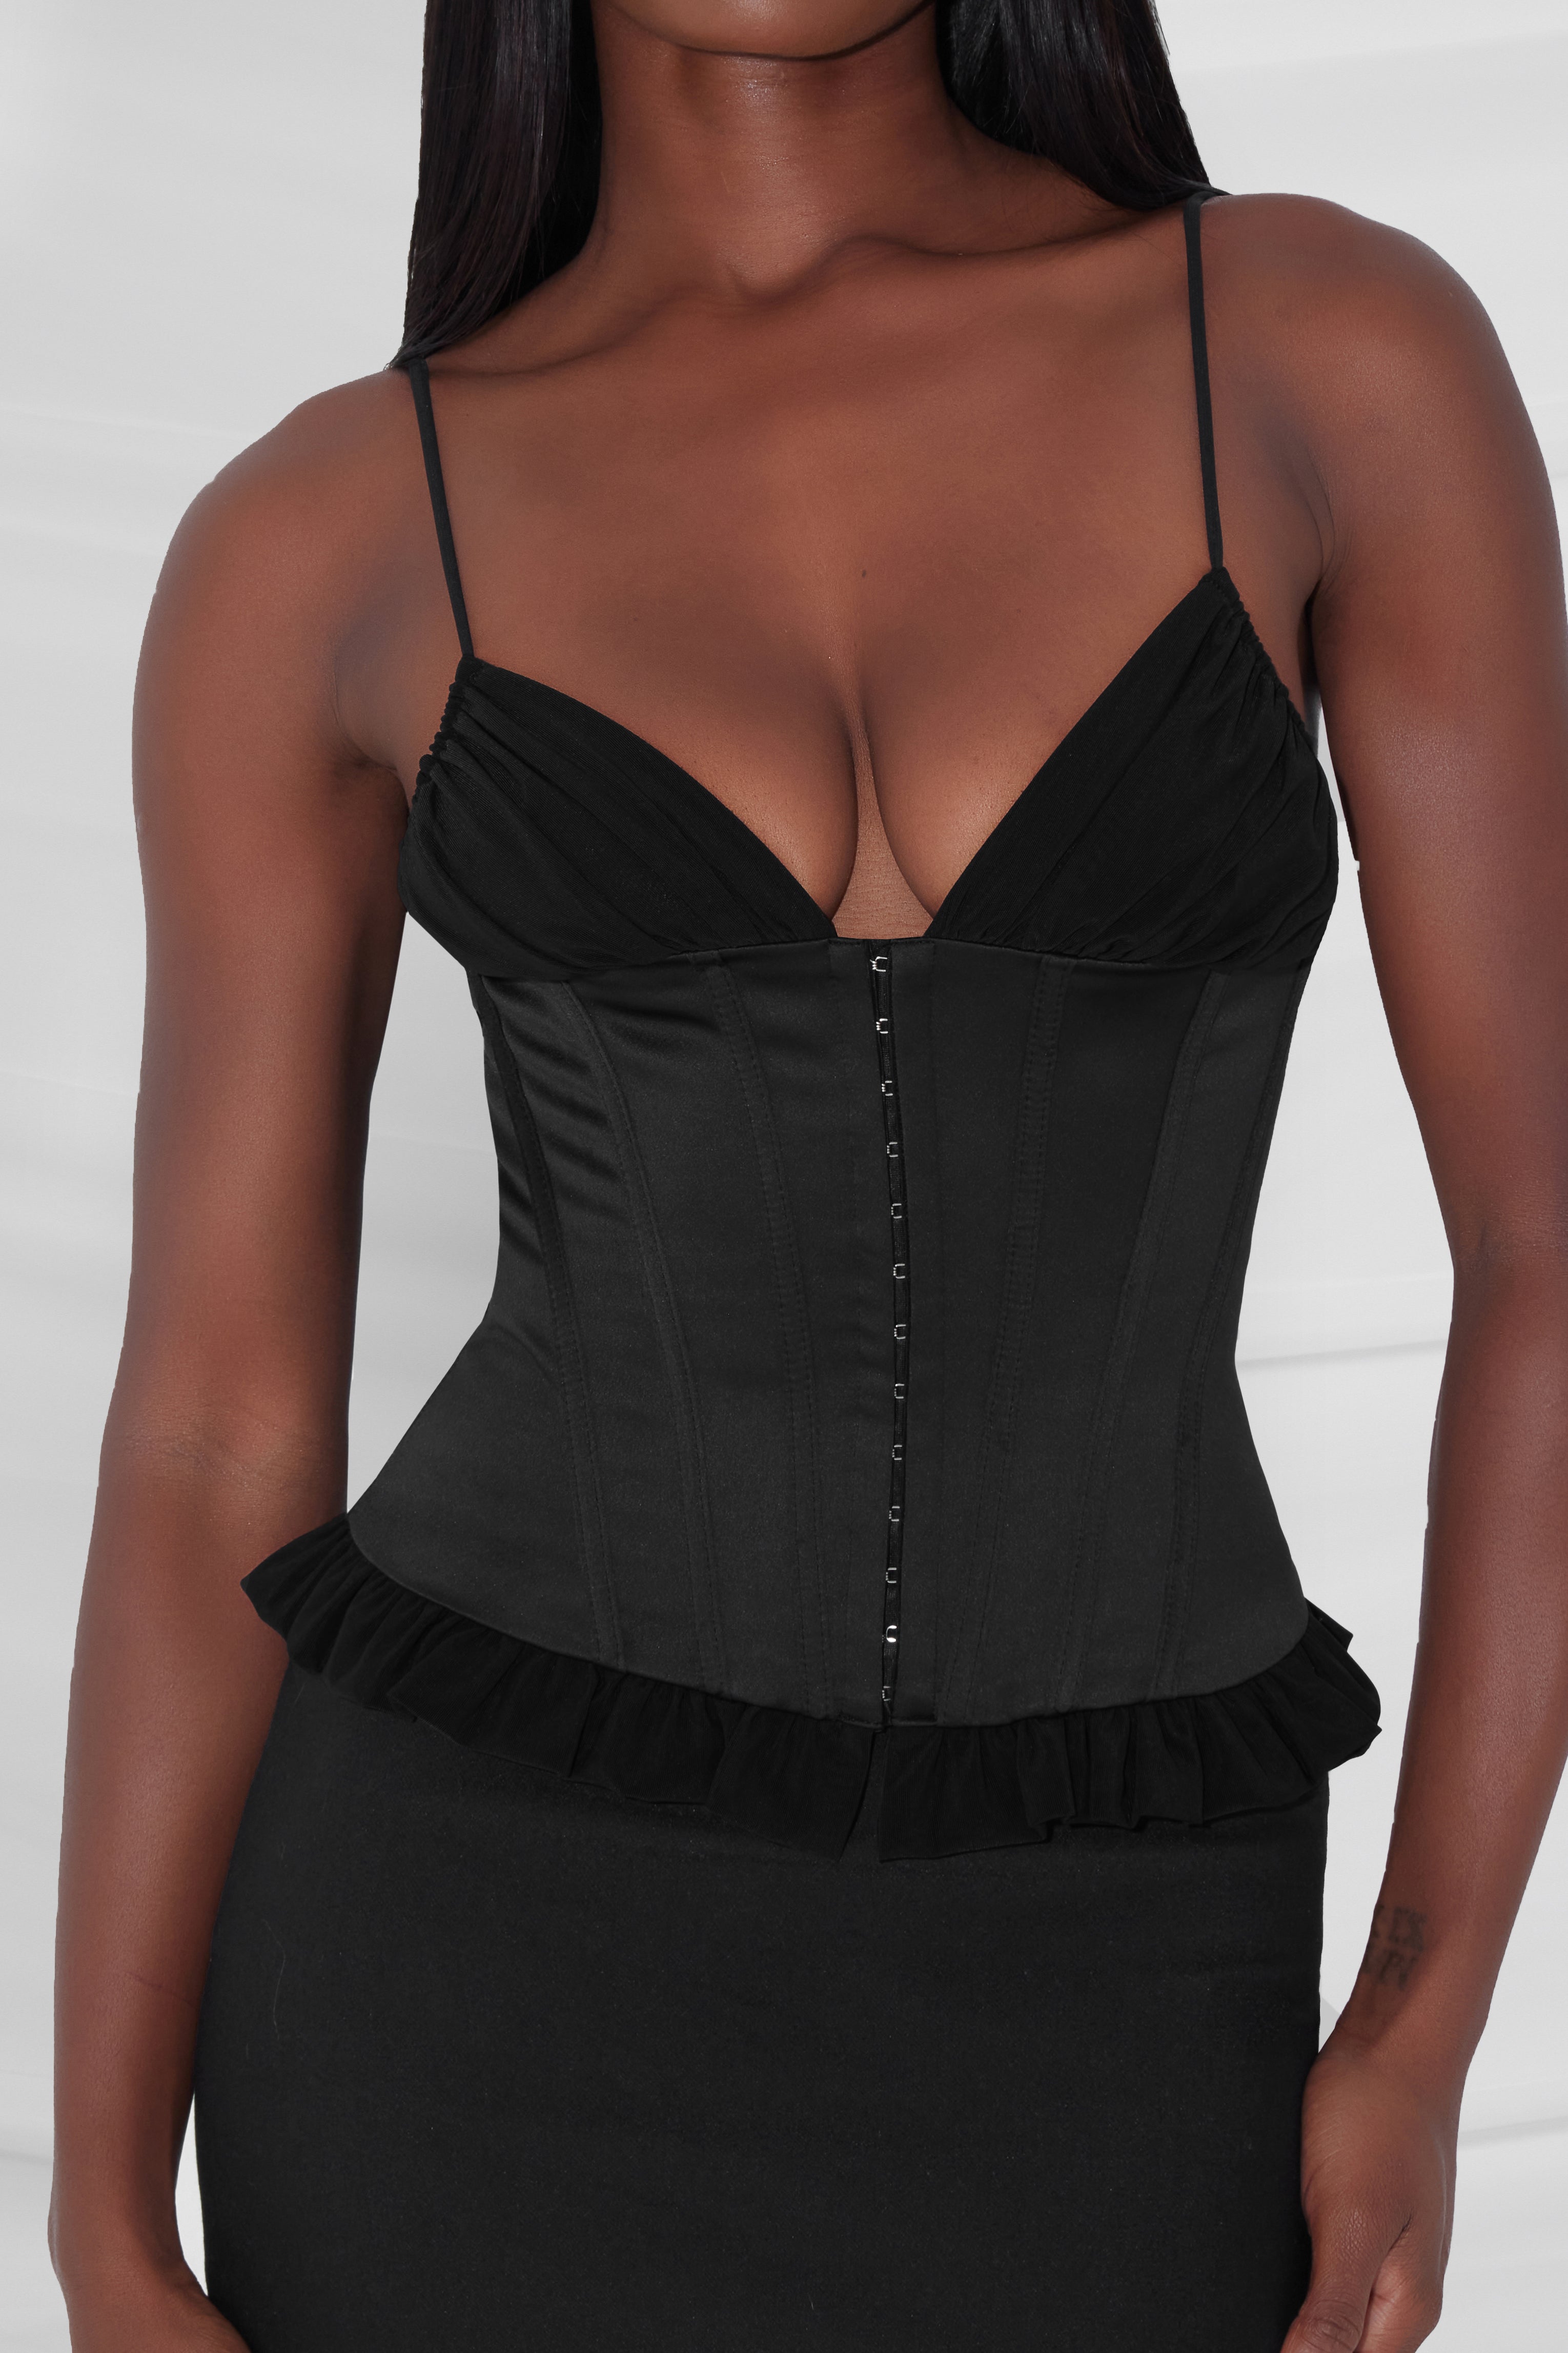 Wolford Women's Etoile - Lightly Lined Long Line Bustier Top, Black, 80D